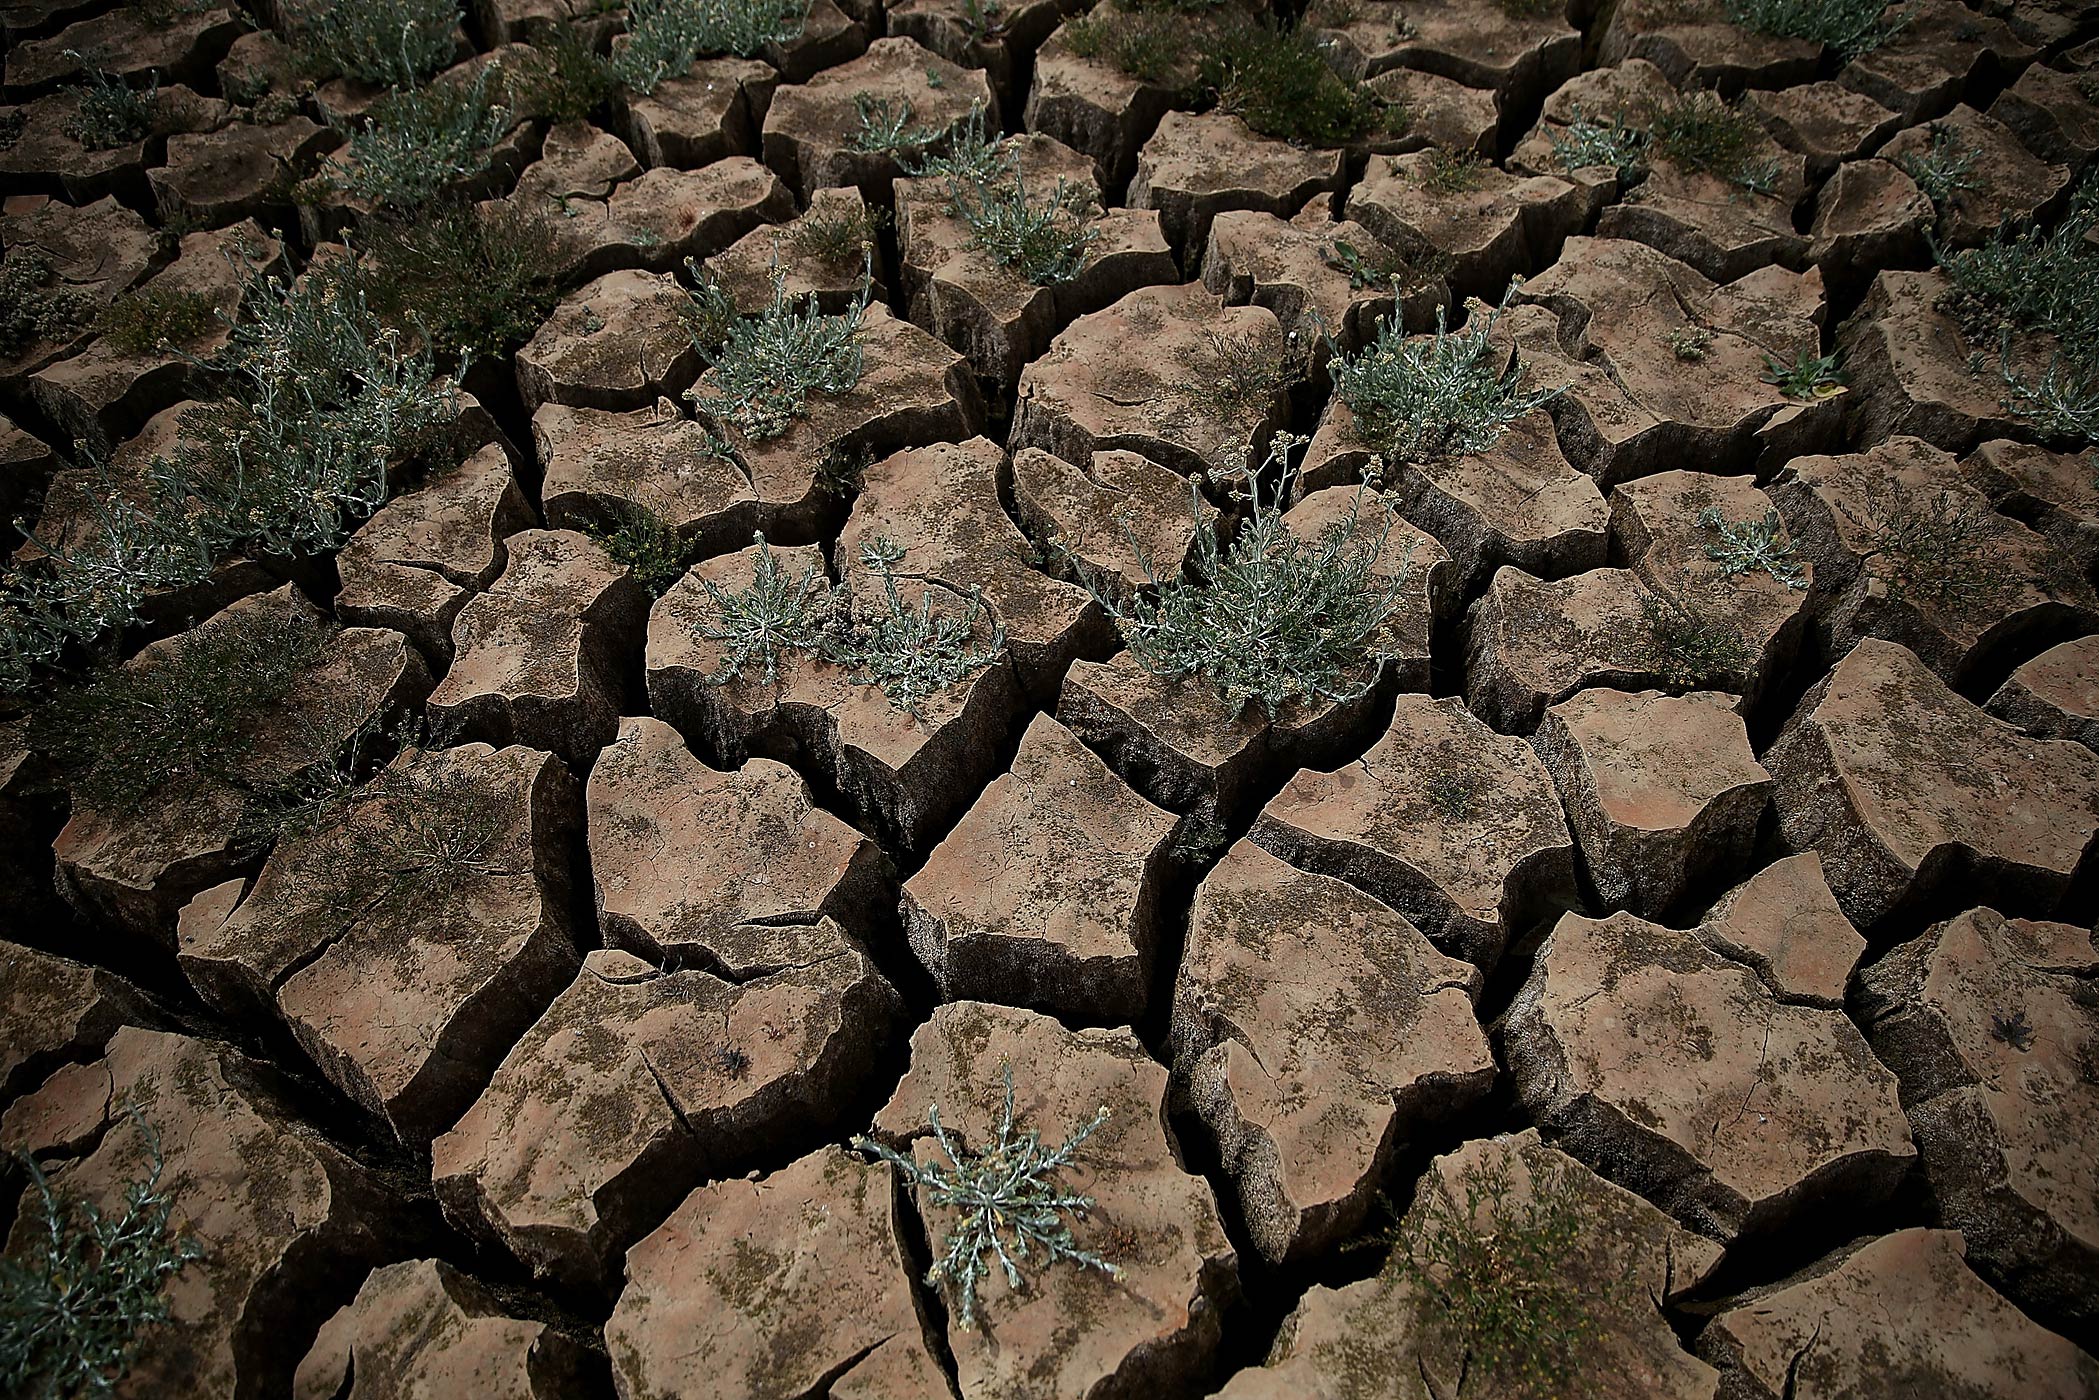 Weeds grow in dry cracked earth that used to be the bottom of Lake McClure on March 24, 2015 in La Grange, Calif. (Justin Sullivan—Getty Images)